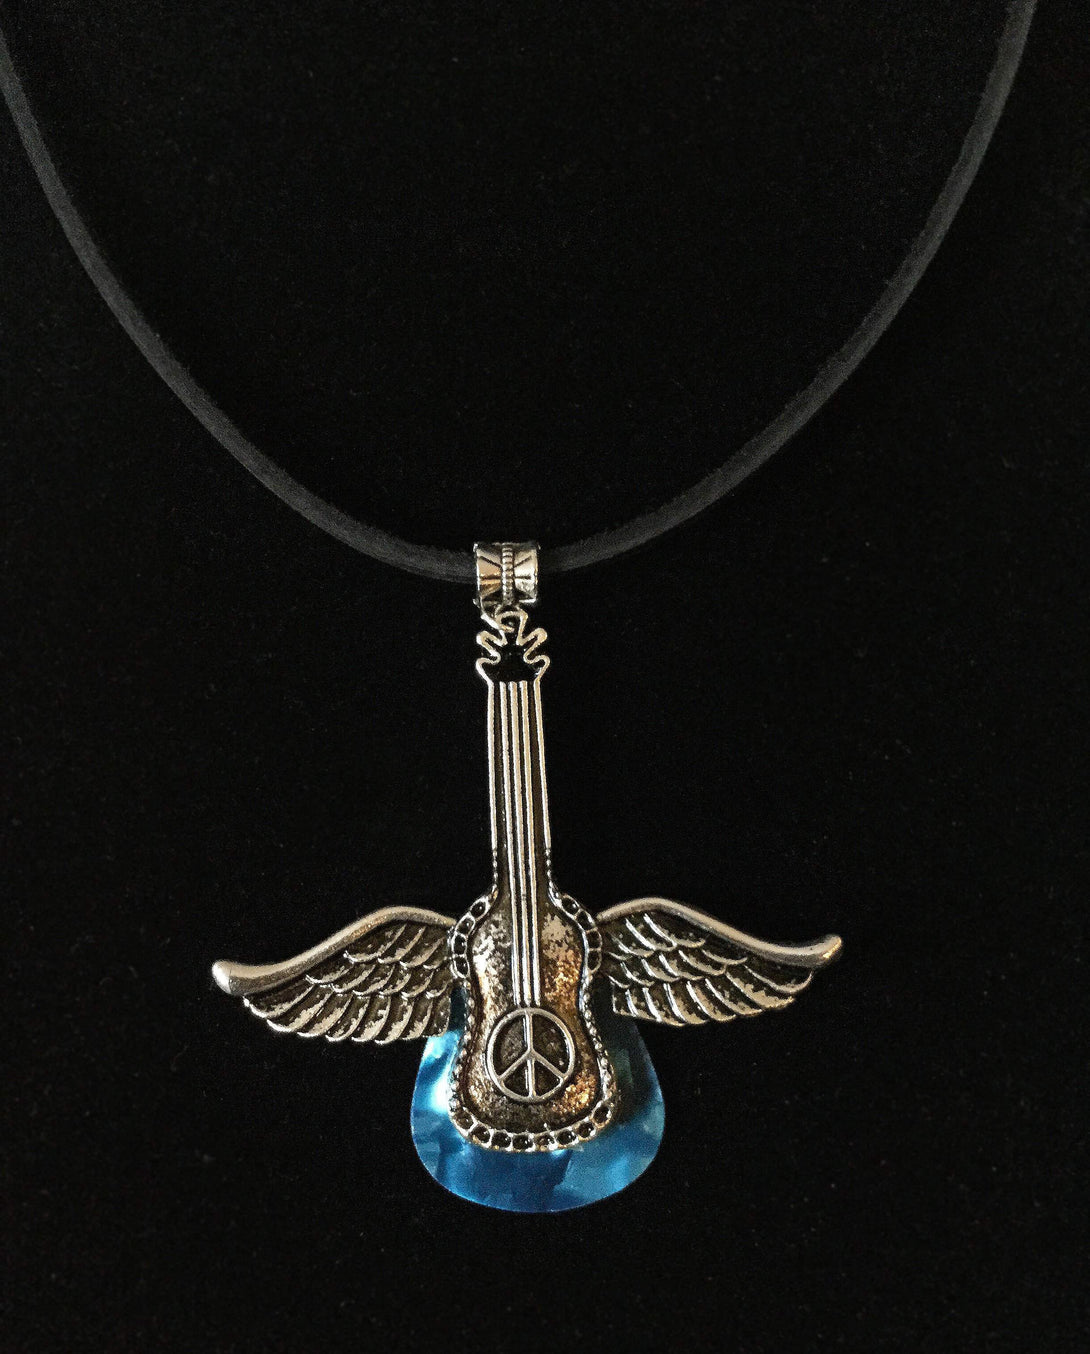 Peaceful Wings Collection - Pendant made with guitar pick. Custom Design Jewelry- HRH Studio Boutique